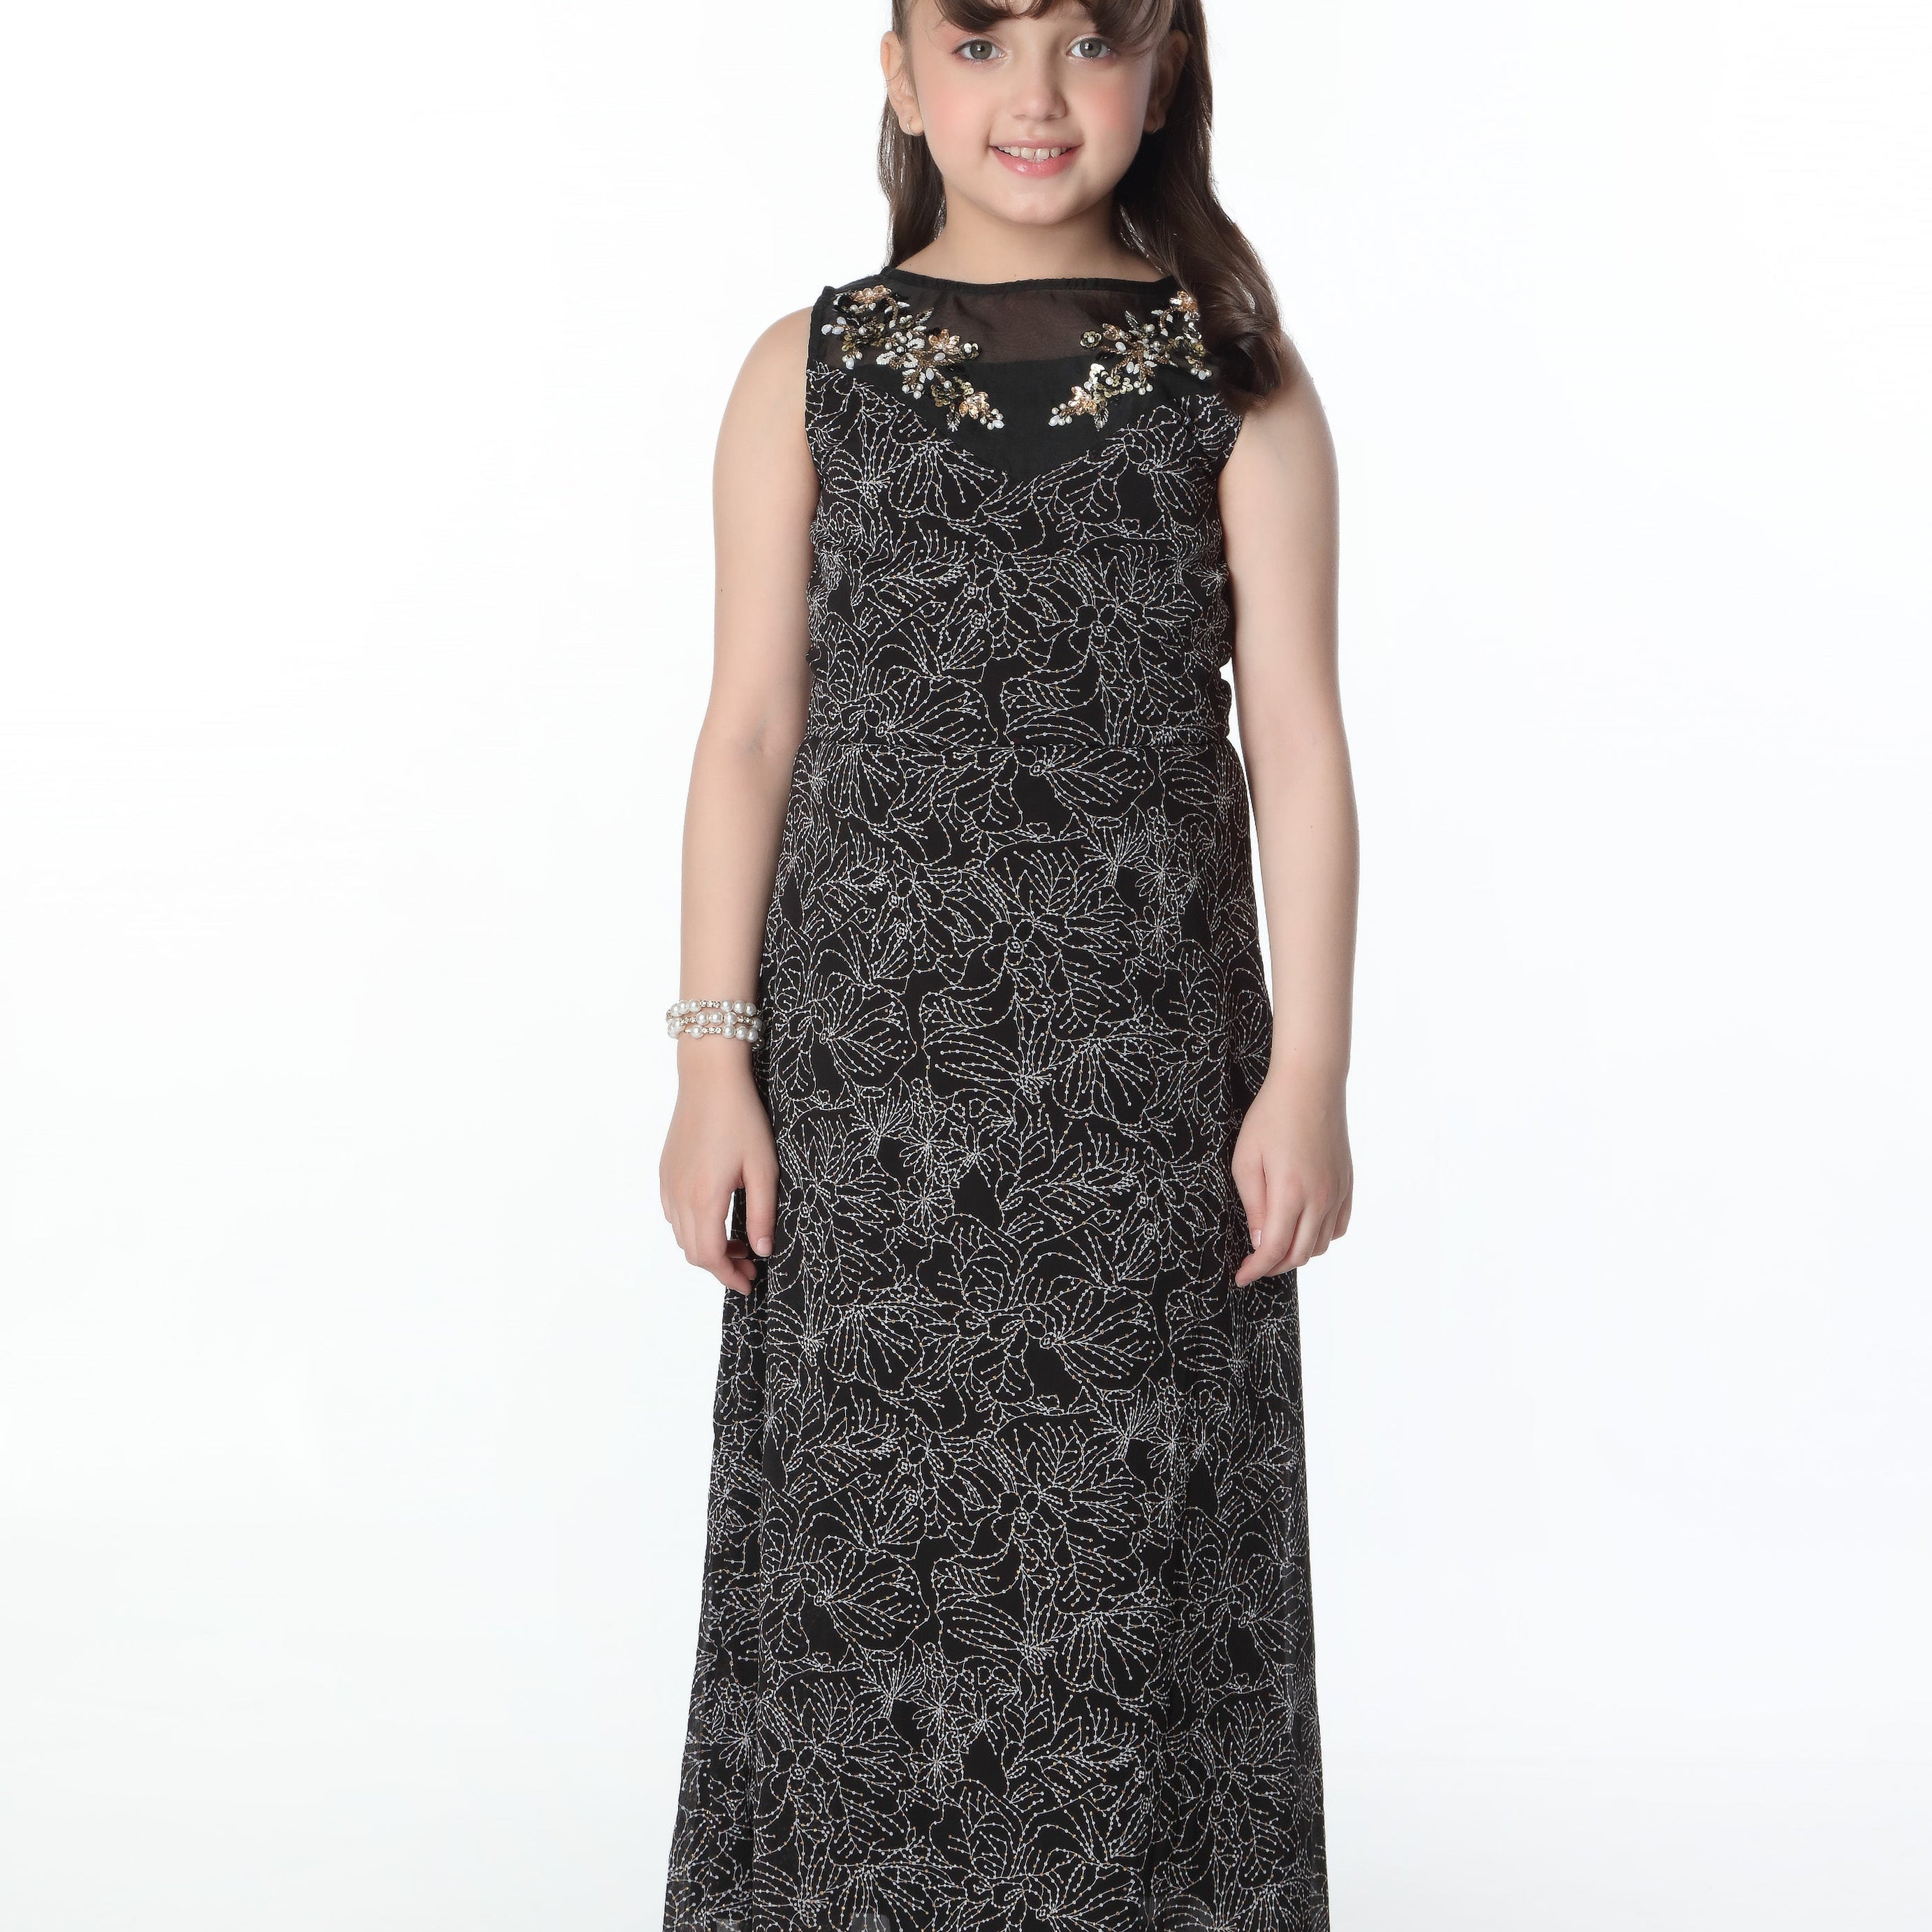 Fashionably Styled Girls Embellished Gown - Available Online Now!